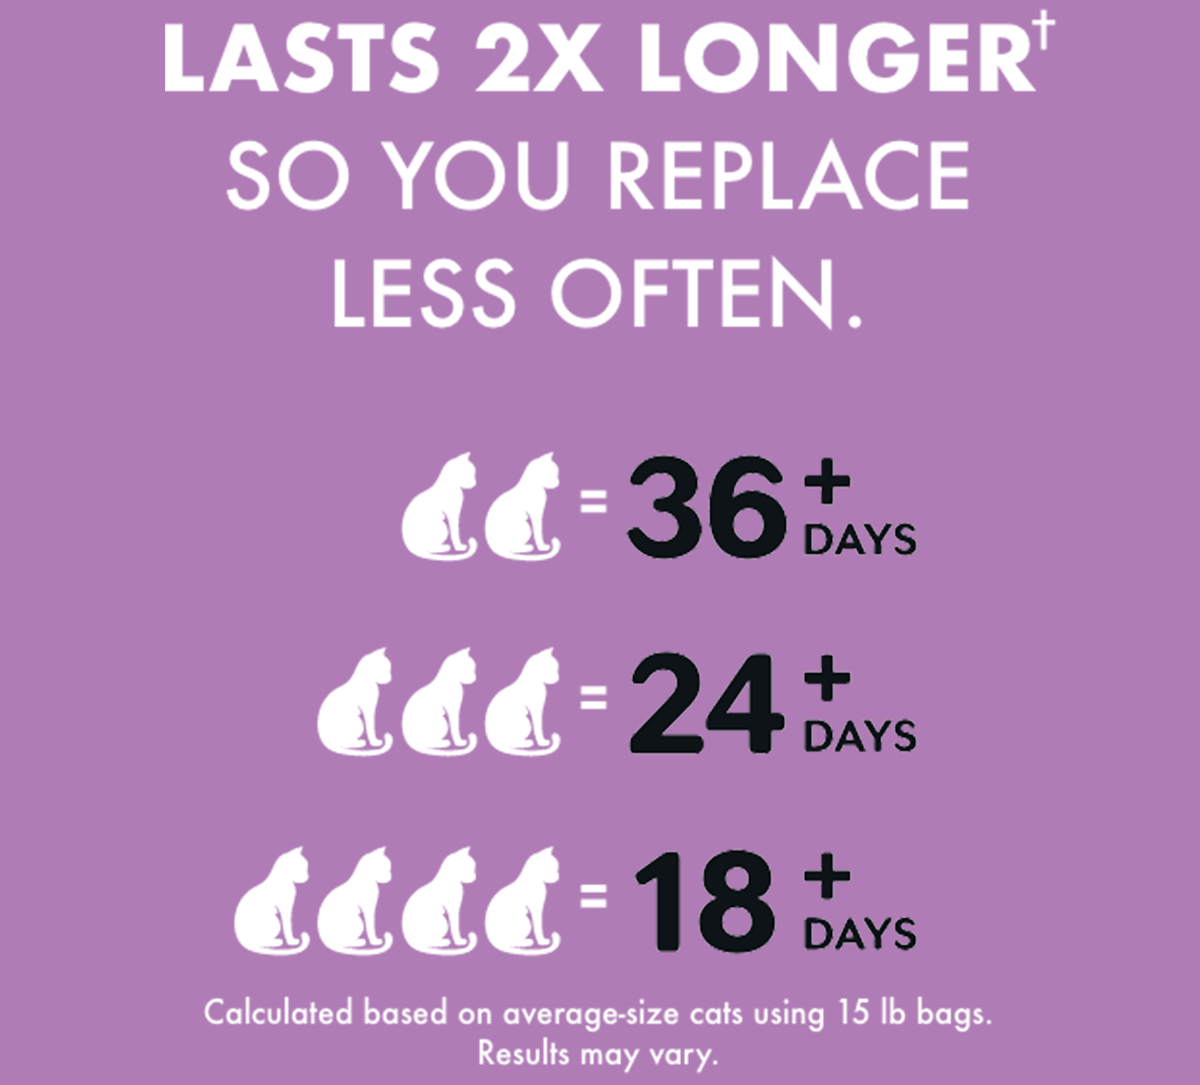 Lasts 2x longer† so you replace less often. ( 2 cats = 36+ days. 3 cats = 24+ days. 4 cats = 18+ days. ) Calculated based on average-size cats using 15 lb bags. Results may vary.